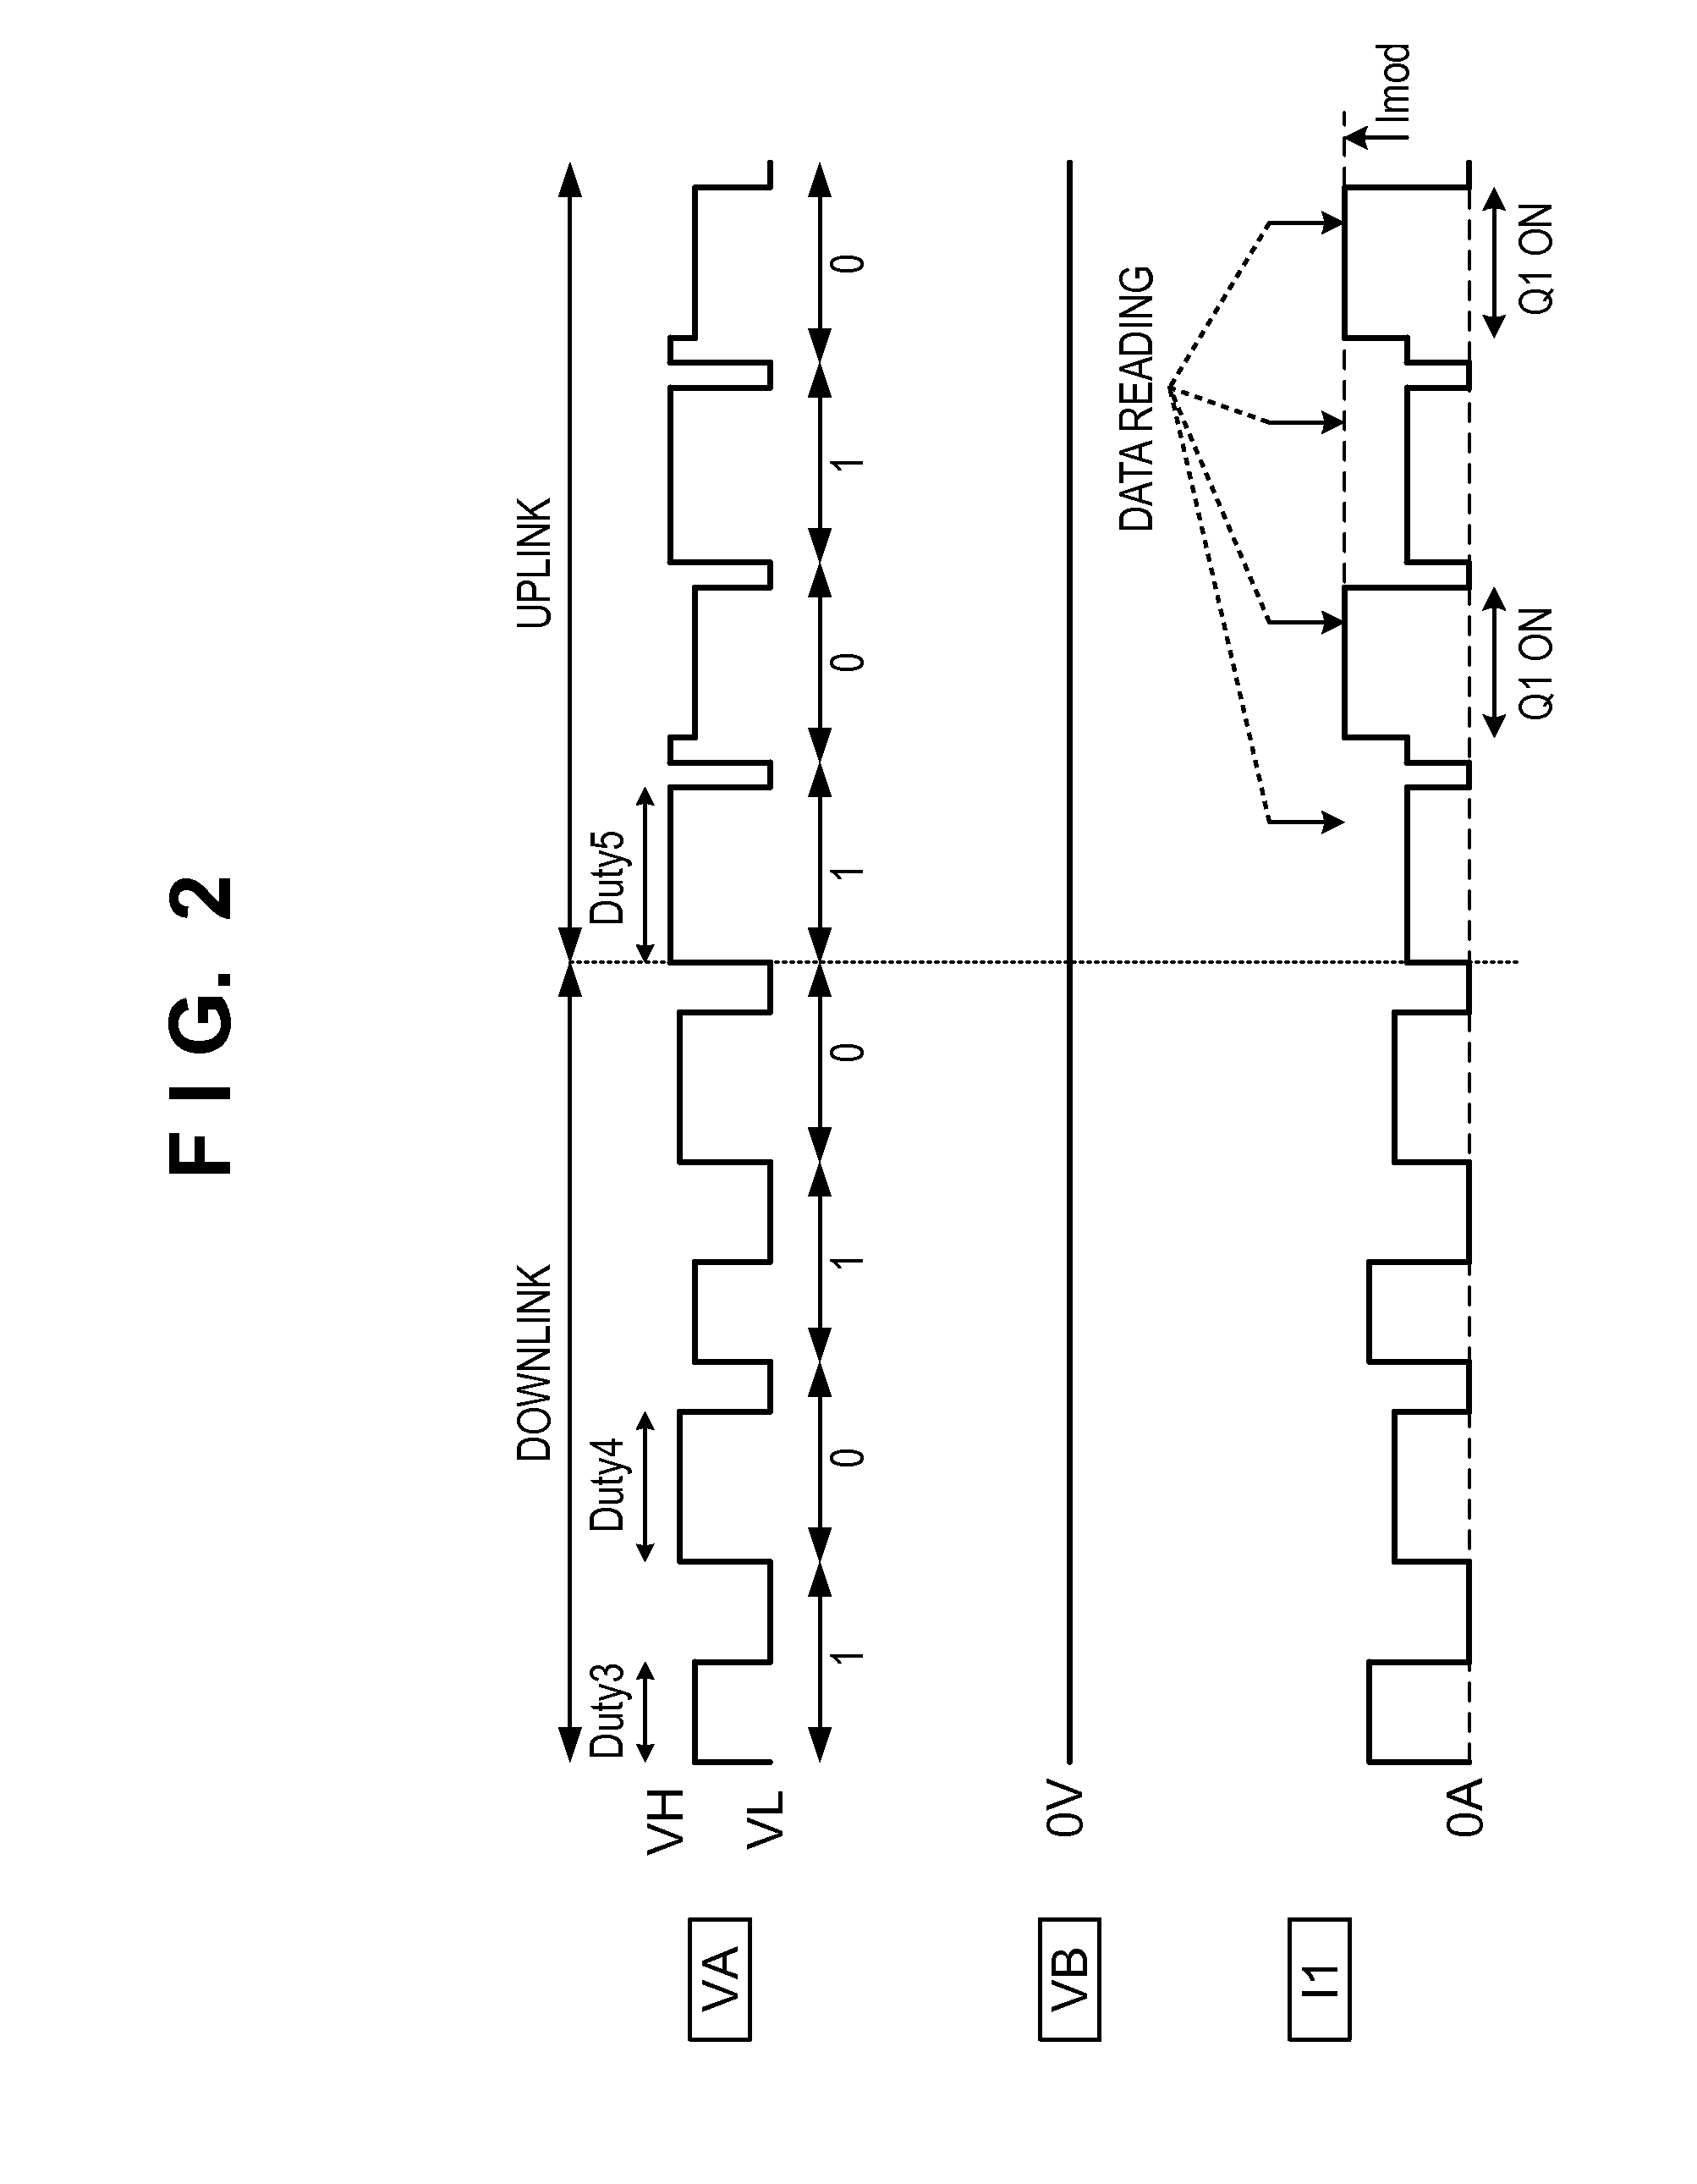 Data communication system, data carrier driving apparatus, and data carrier apparatus